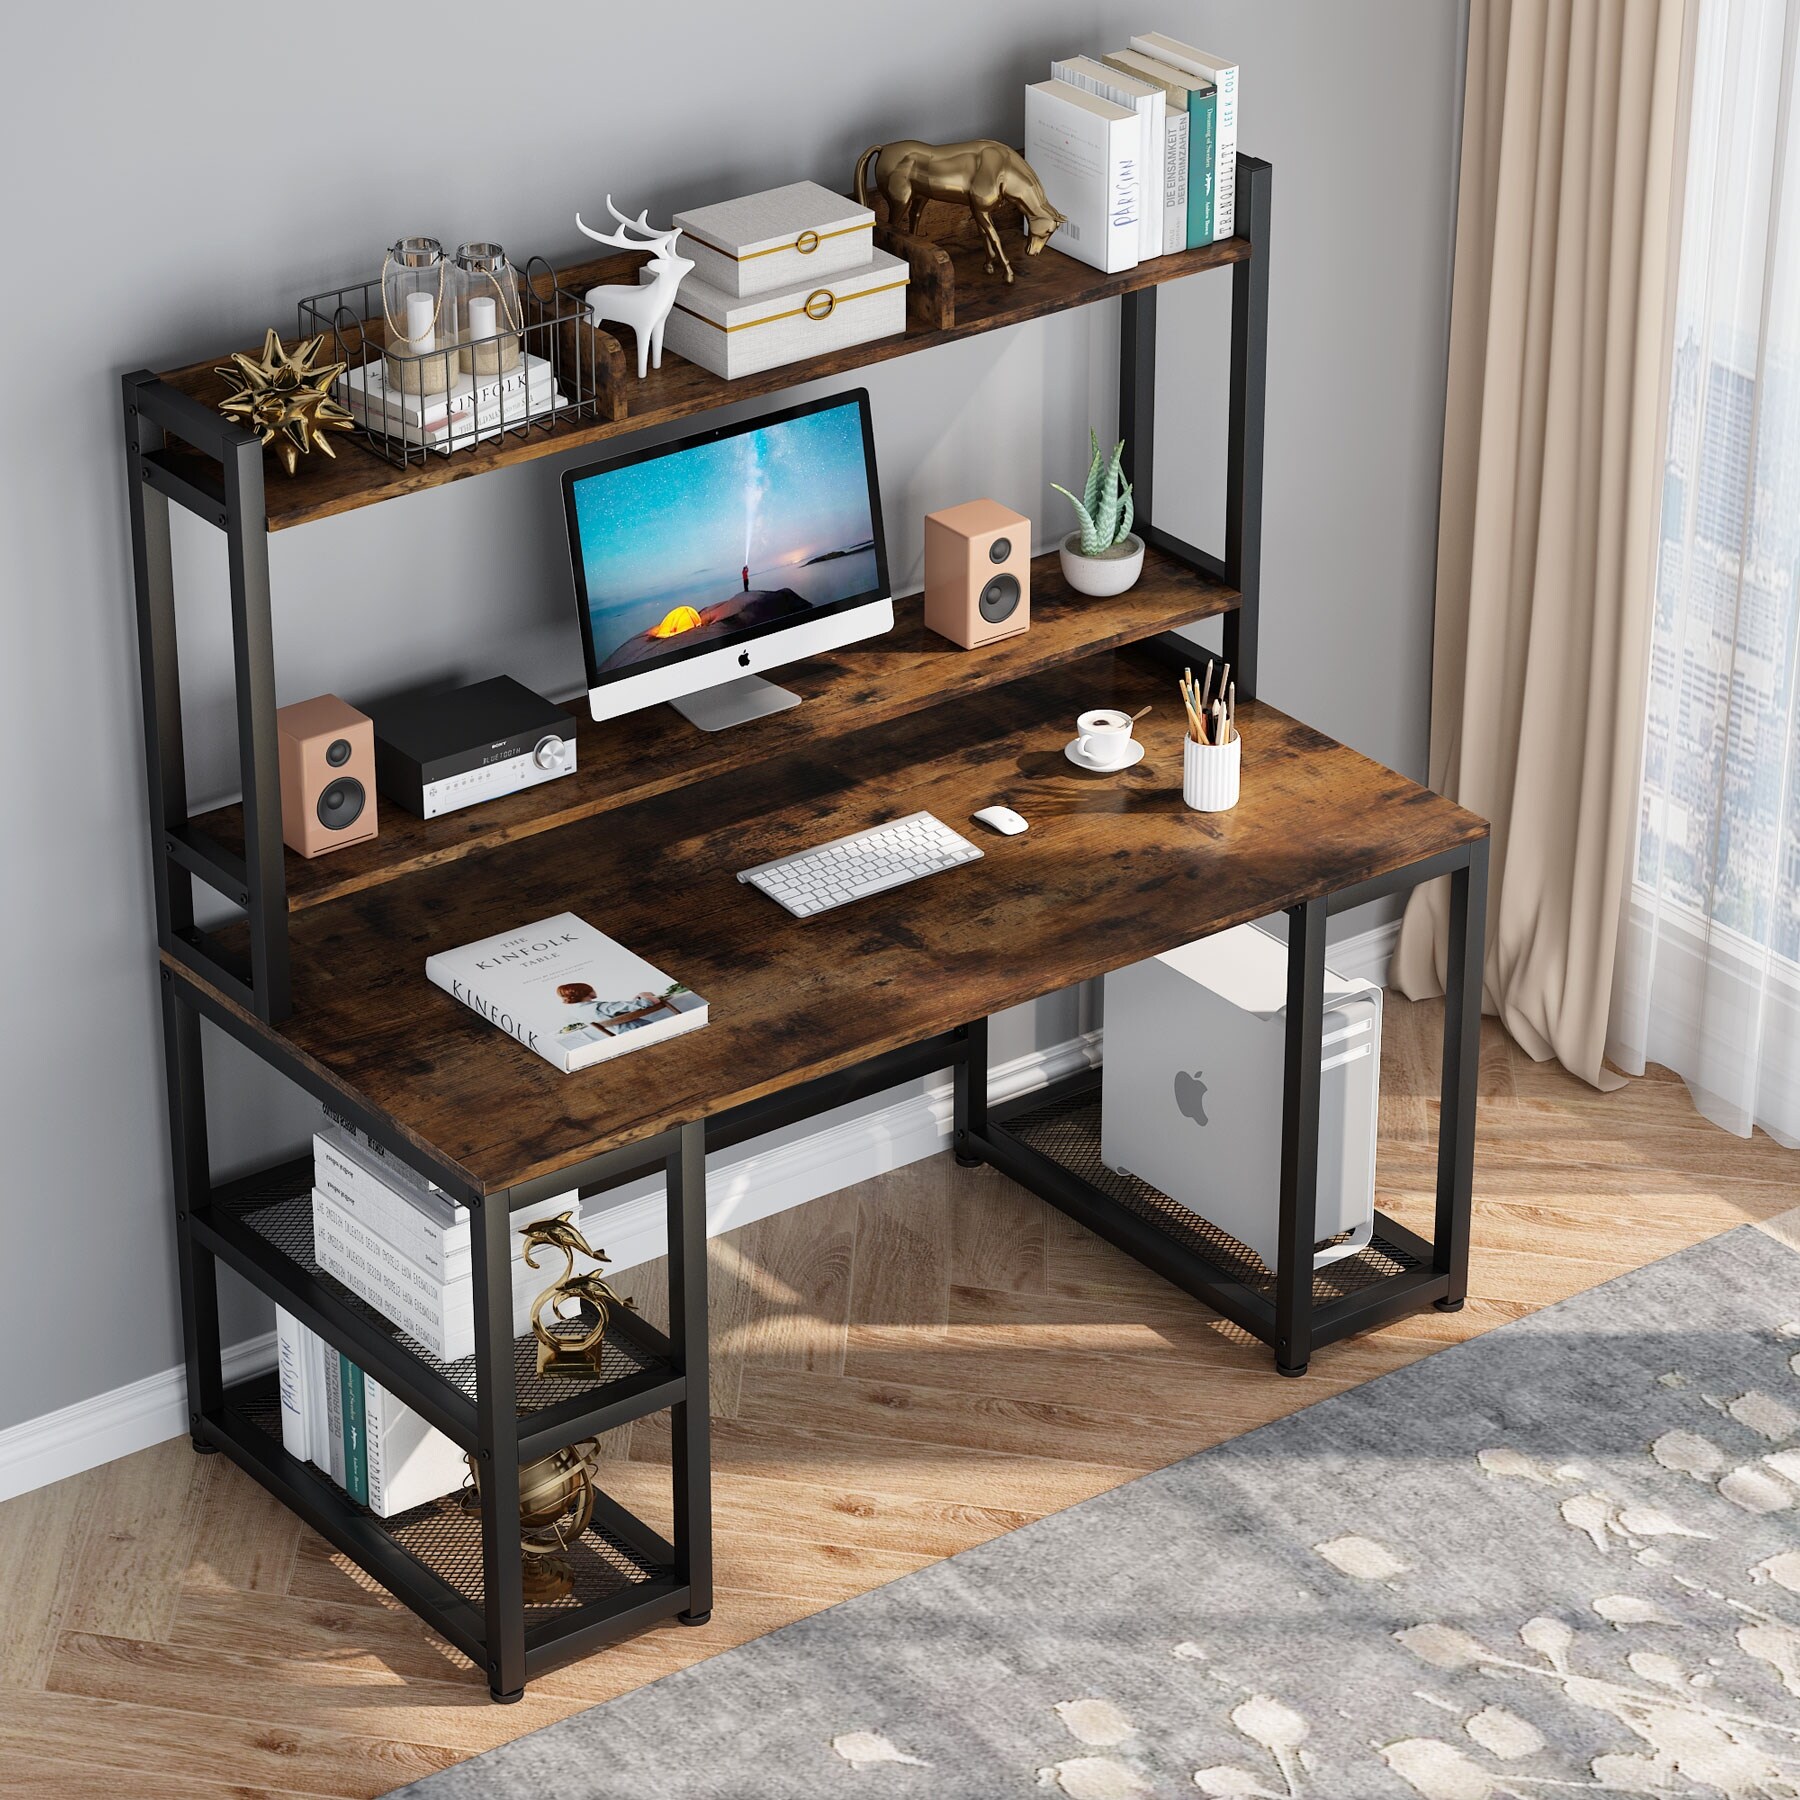 https://ak1.ostkcdn.com/images/products/is/images/direct/764b2f4c4adc7e5f03b322780e471b4e9218e797/Computer-Desk-with-Hutch-and-Monitor-Stand-Riser%2C-Rustic-Industrial-Desk-Computer-Table-Studying-Writing-Desk.jpg